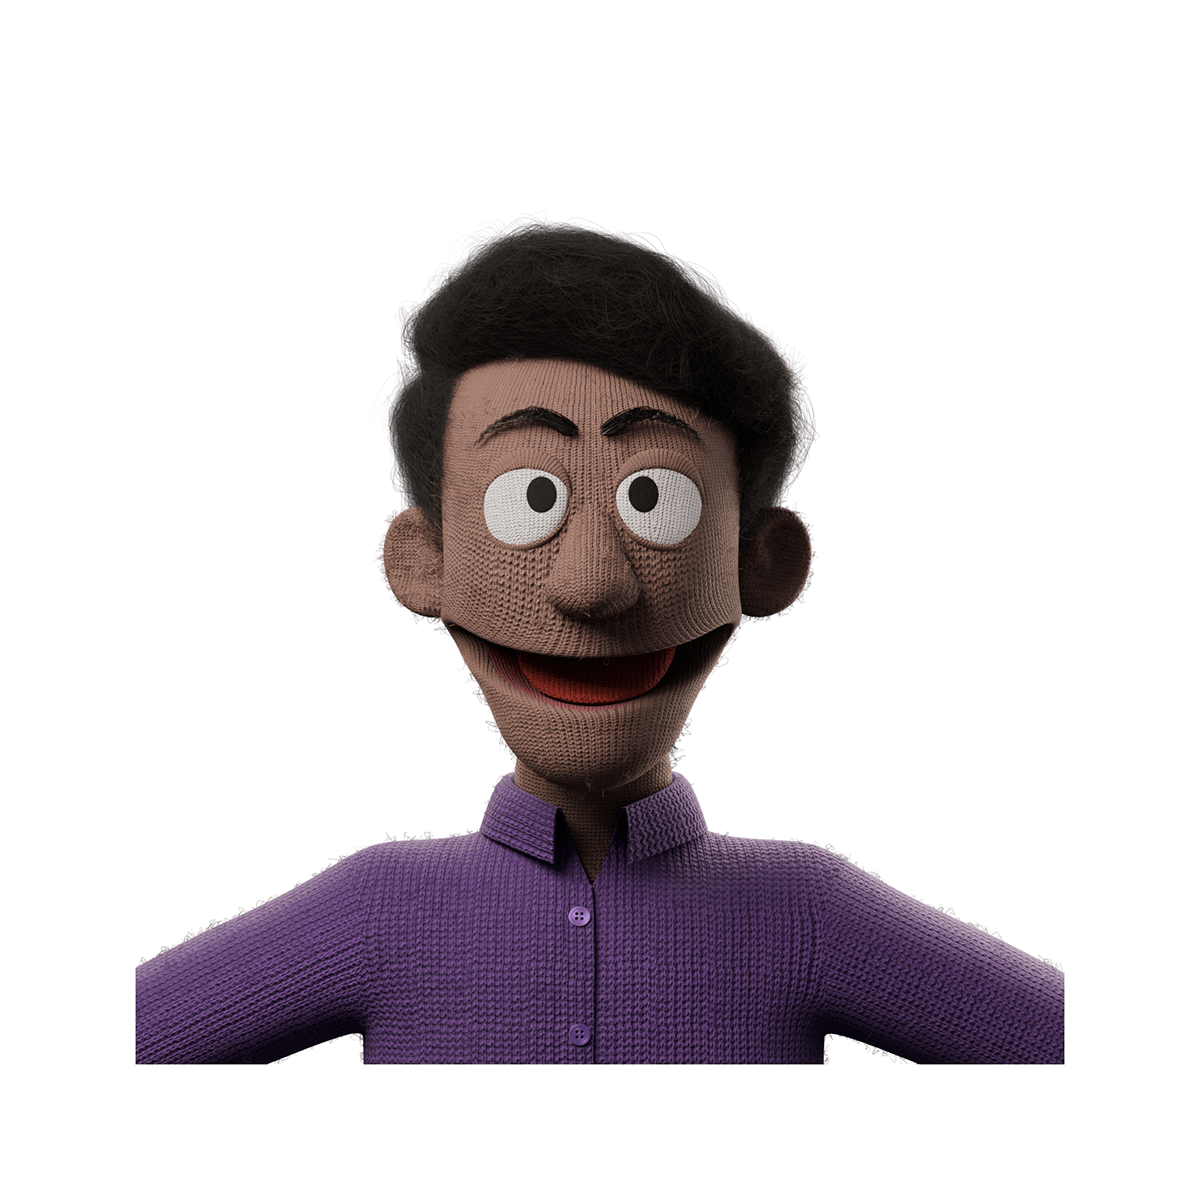 Magic   3D blender rigging animation  Character design  character animation motion graphics  motion 3d  puppets